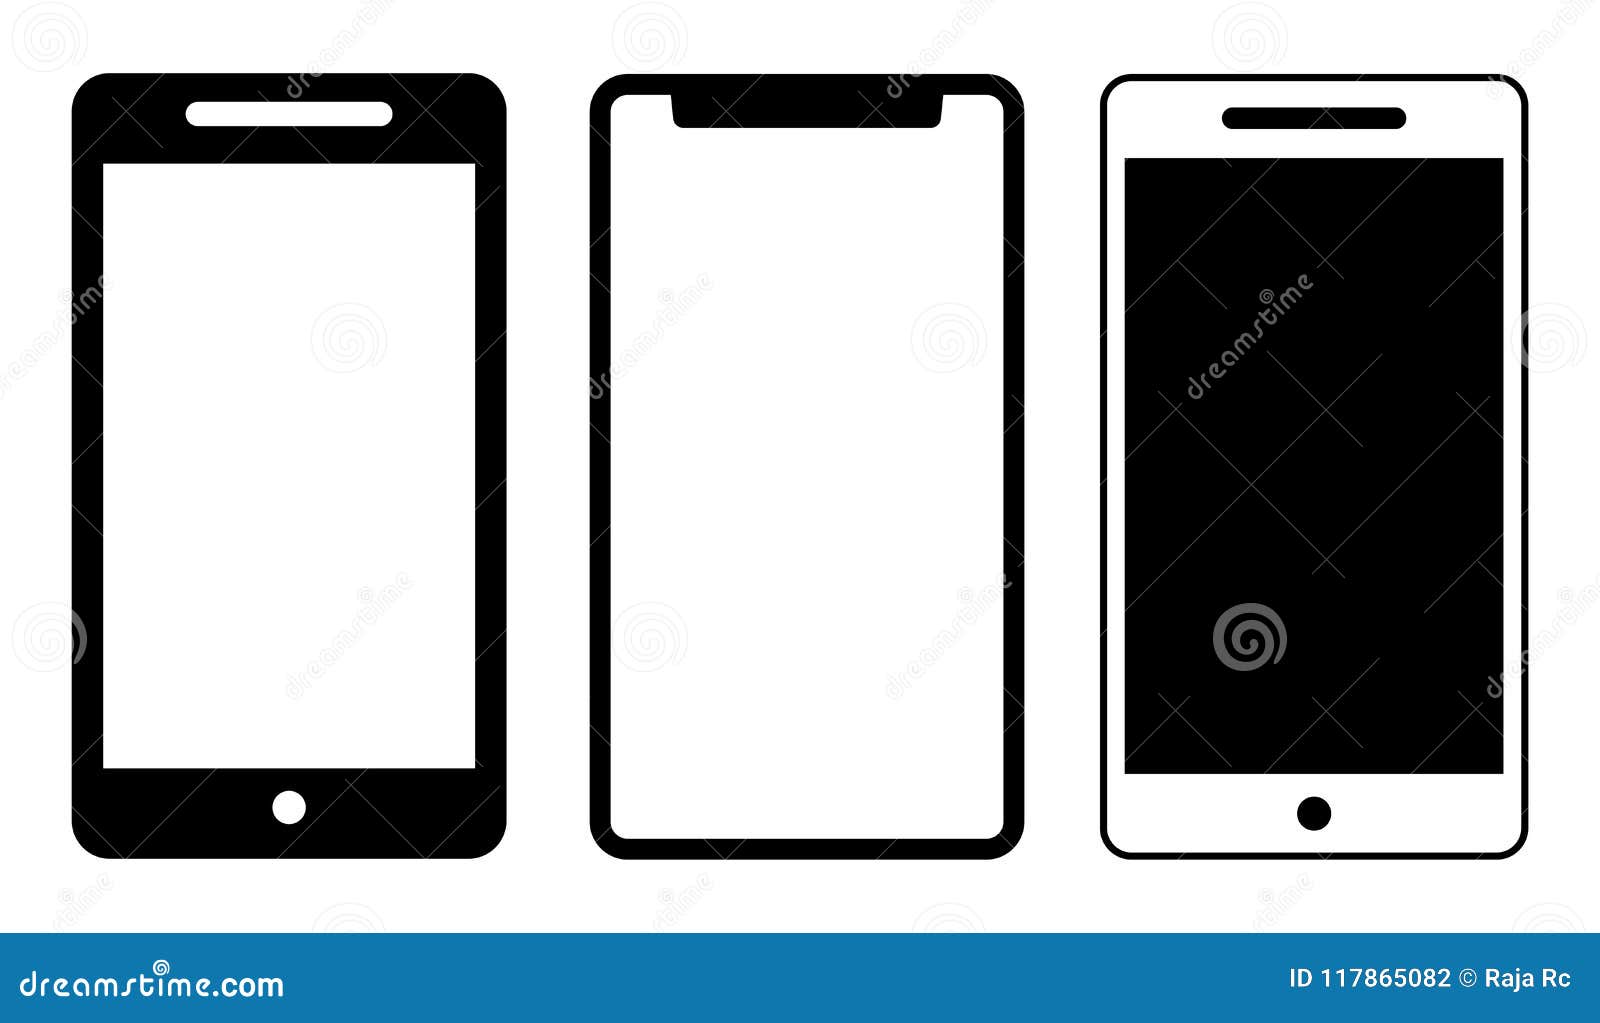 mobile phone icons template black